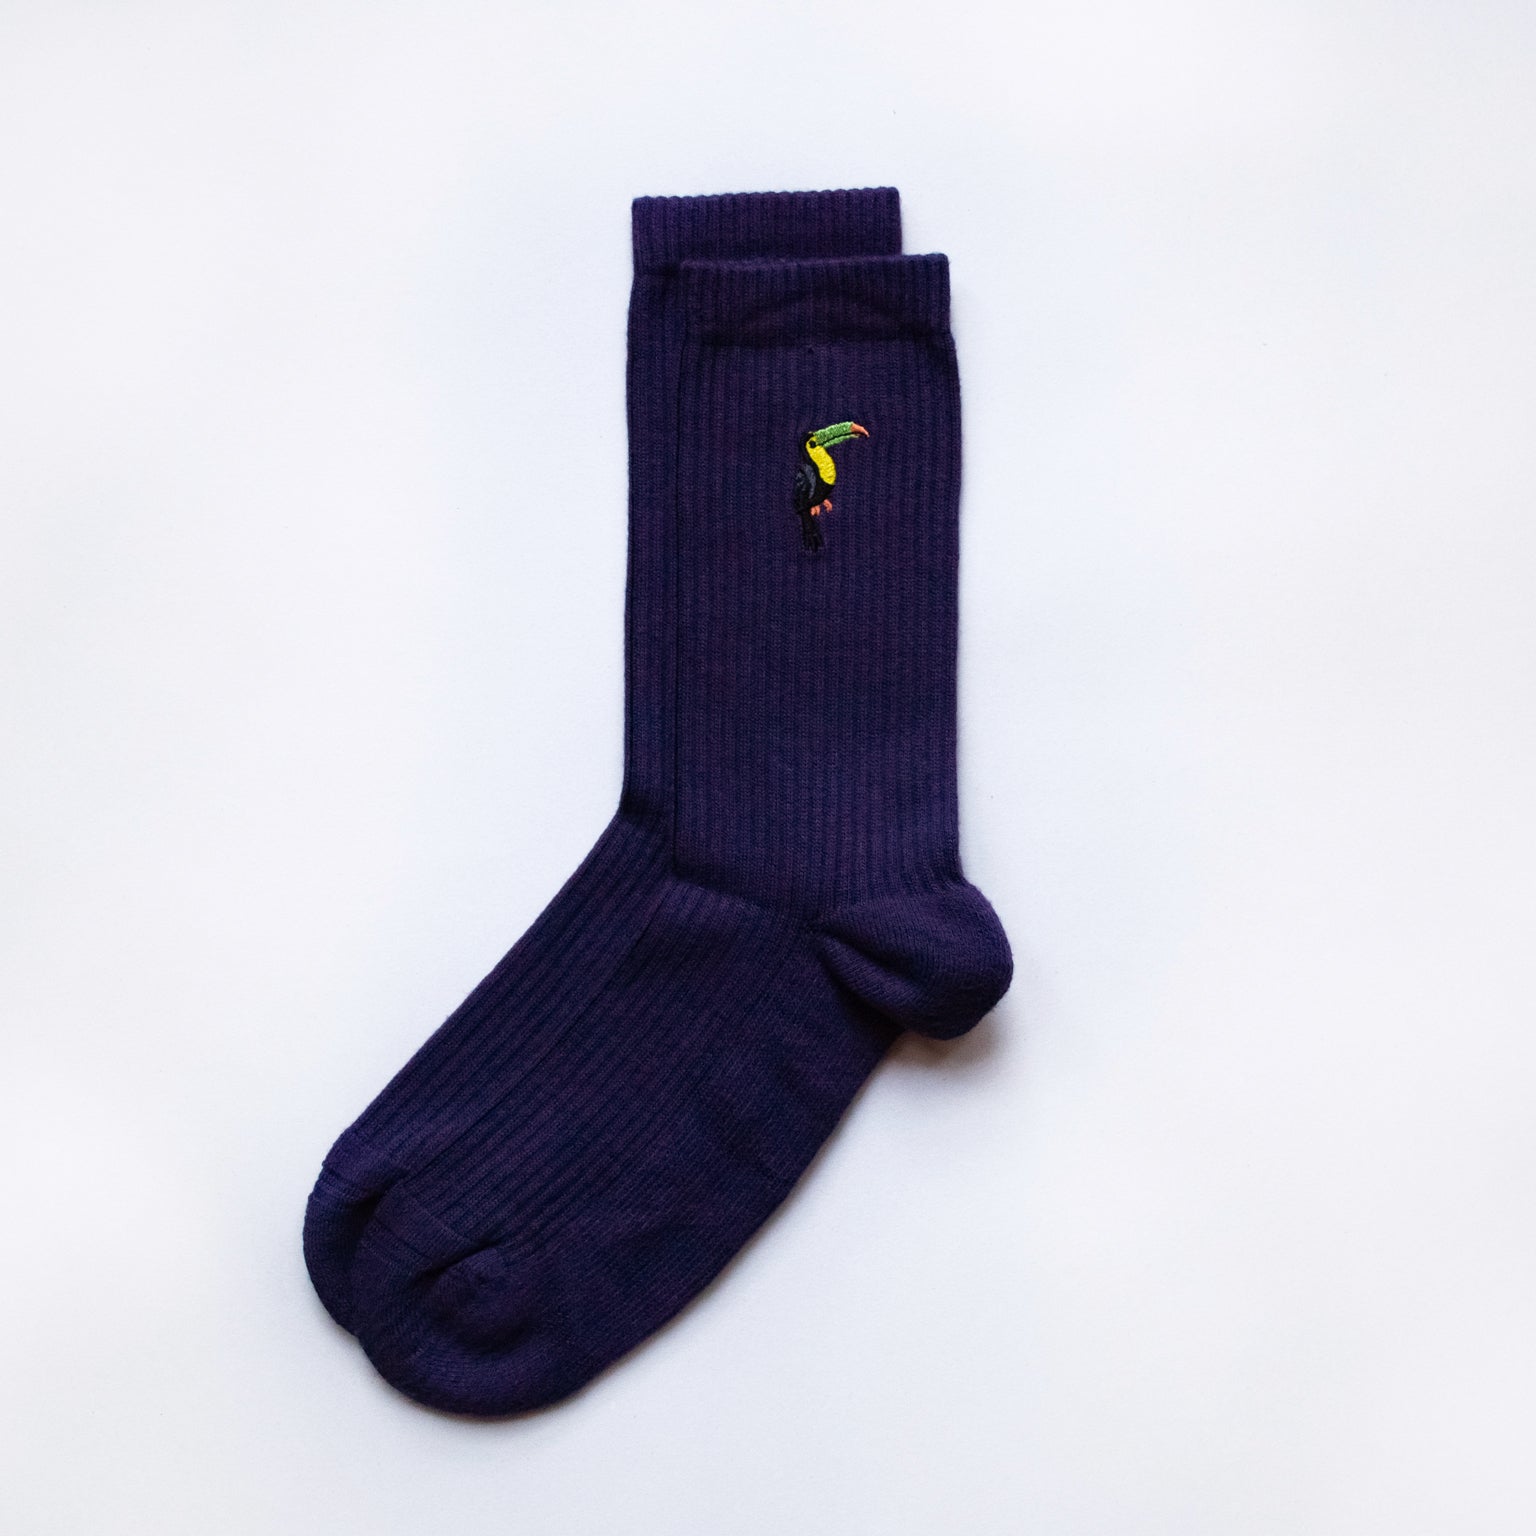 Ribbed Toucan Socks - Bare Kind Bamboo Socks - Save the Toucans